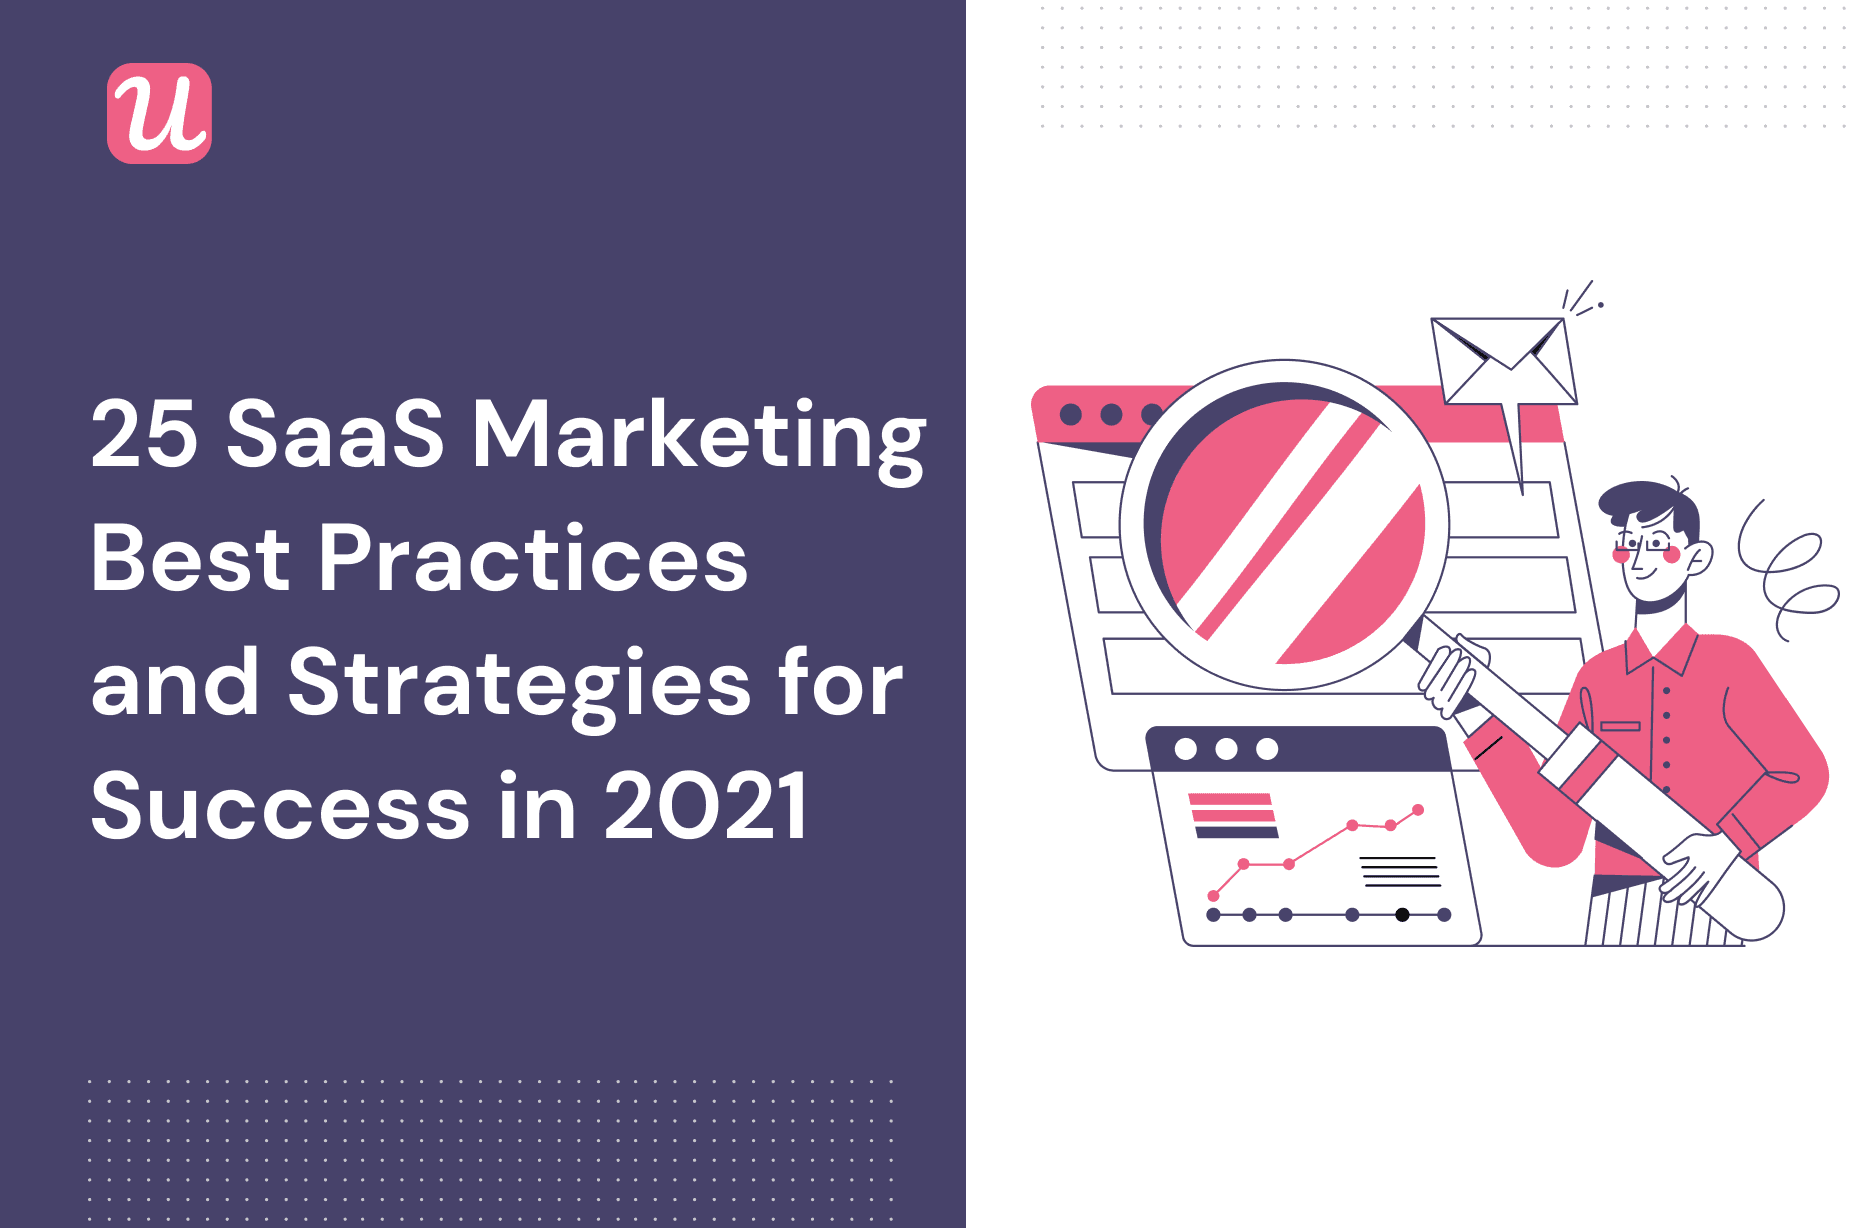 25 SaaS Marketing Best Practices And Strategies For Success In 2021